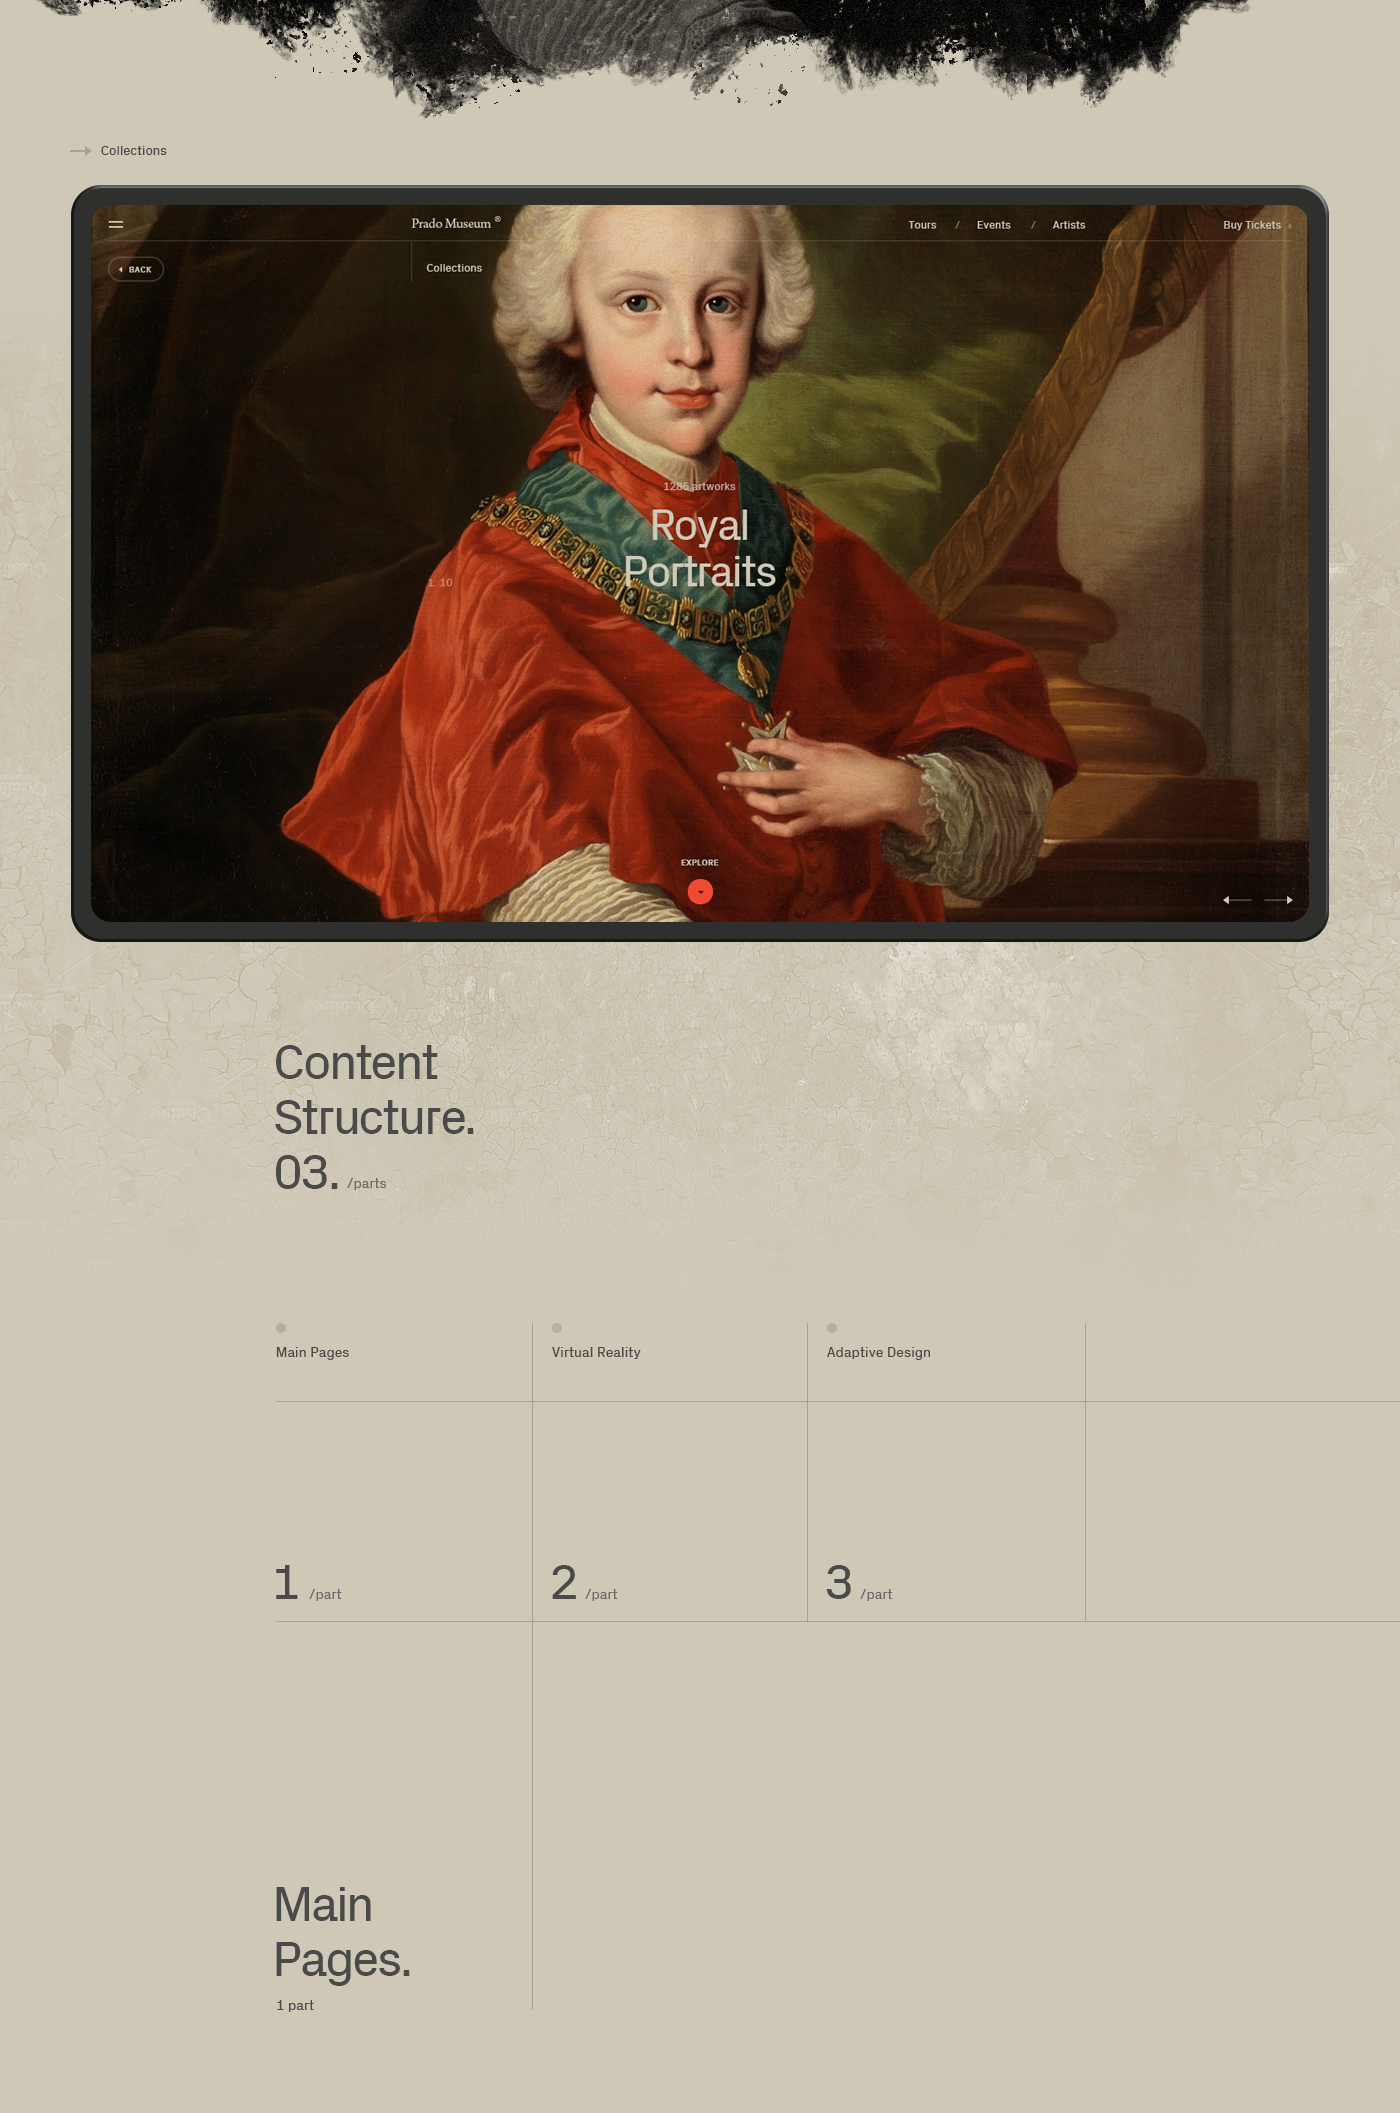 Prado Museum Website with Virtual Reality Experience on Behance6acf1c73878699.5c1a47eabd0fe.png